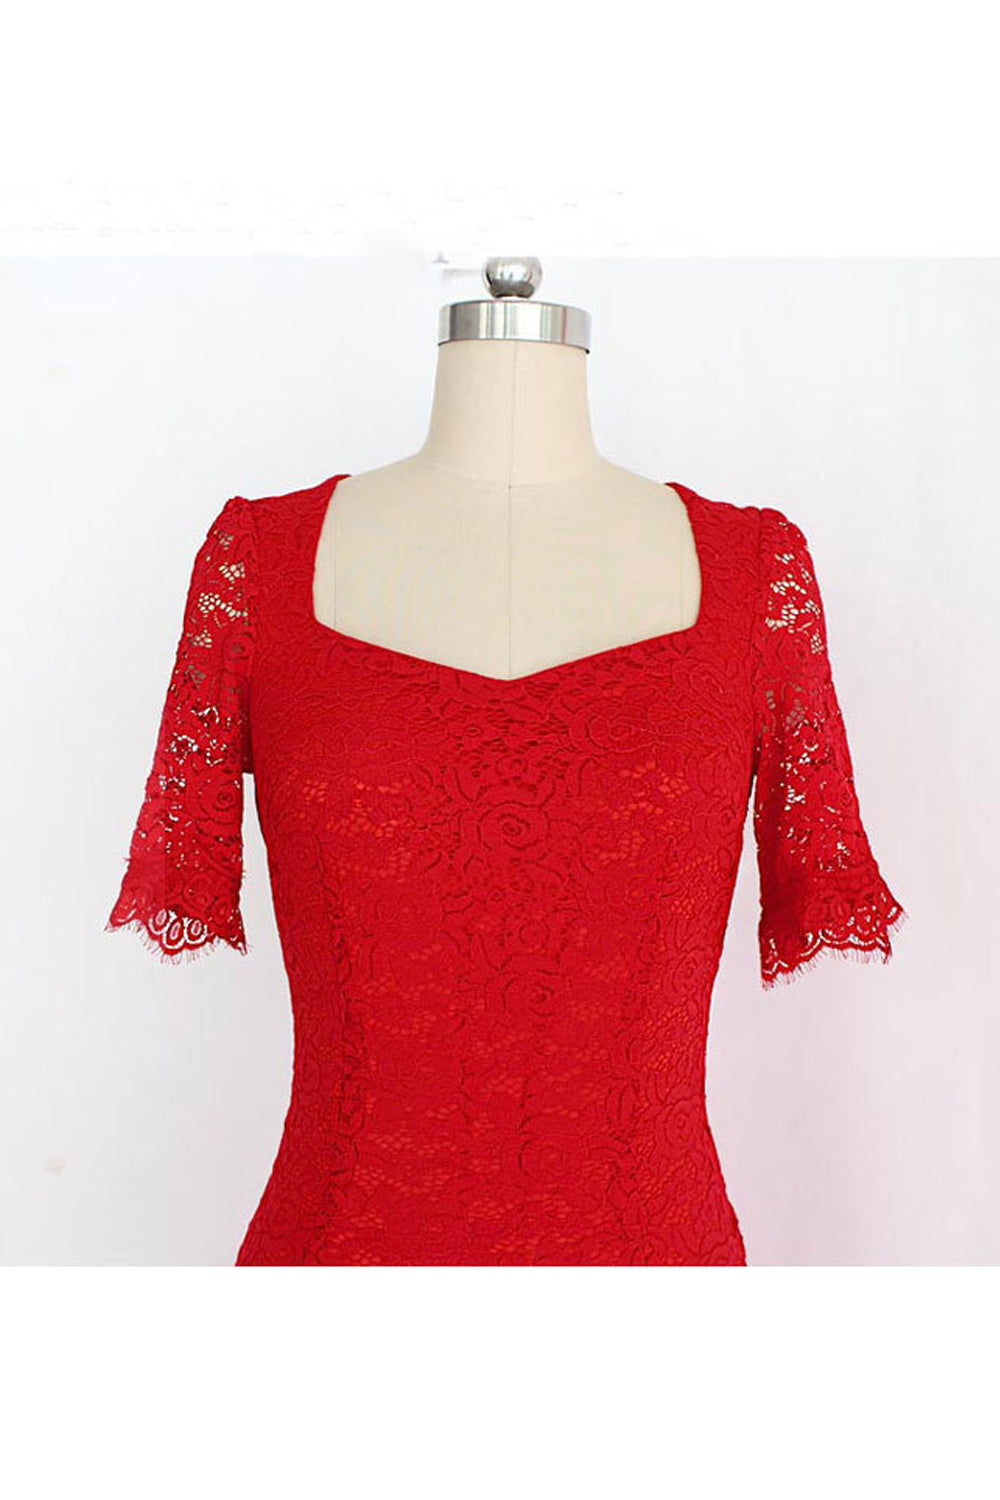 Ketty More Kate Middleton Wearing Red Lace Dress-KMWD295